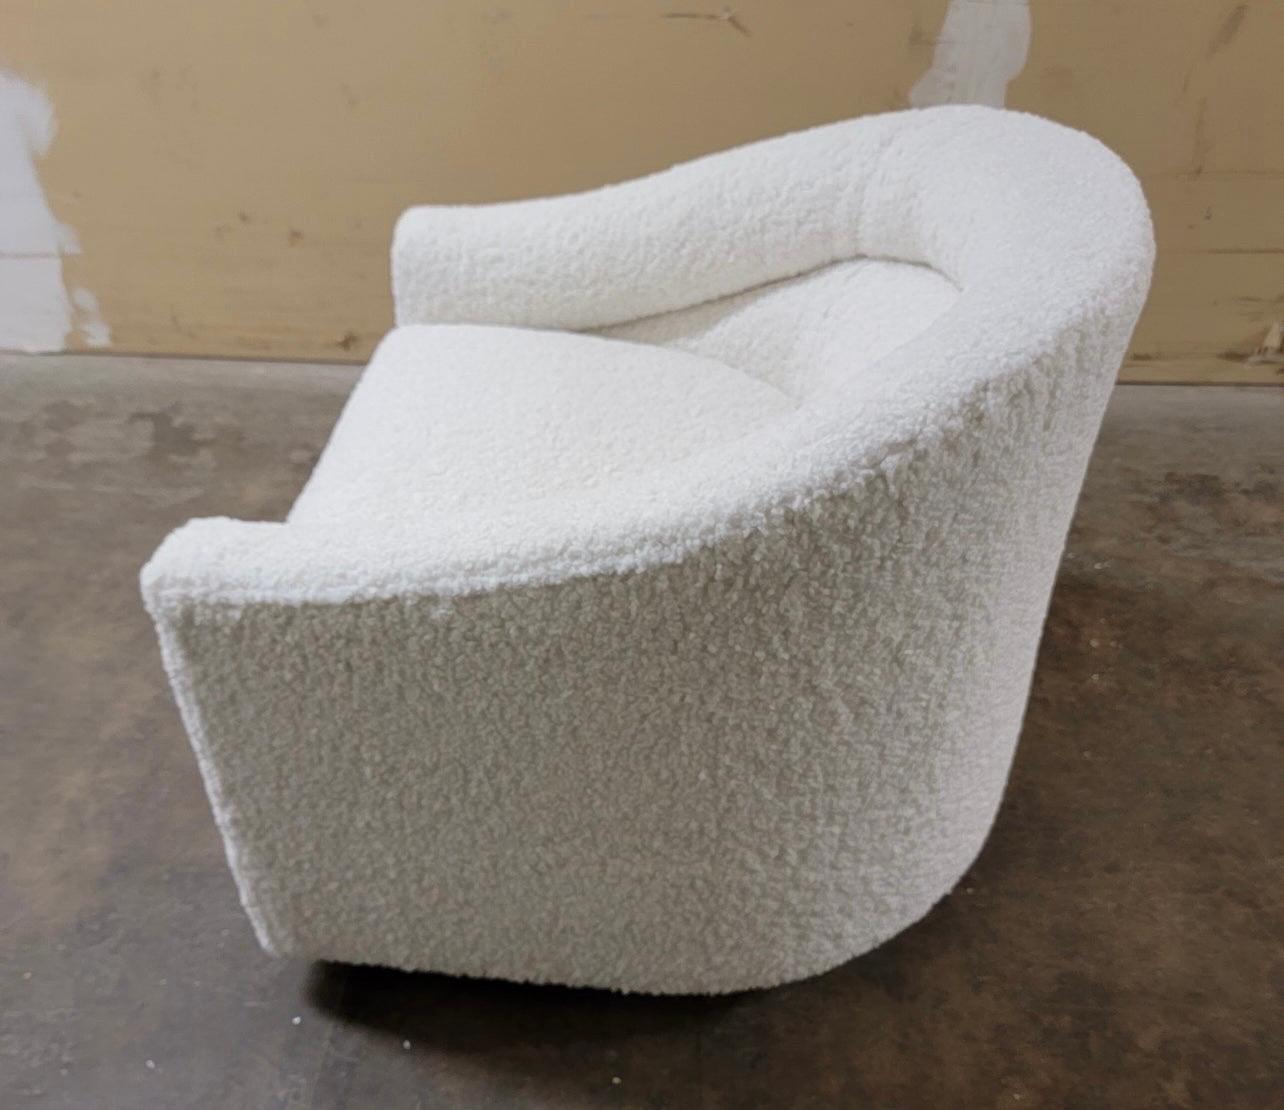 A stunning curved form barrel back swivel chair, circa 1970s by Jalen which was a small custom manufacturer. The chair has been newly reupholstered in a boucle faux shearling fabric which gives it not only a luxurious look but a comfortable feel